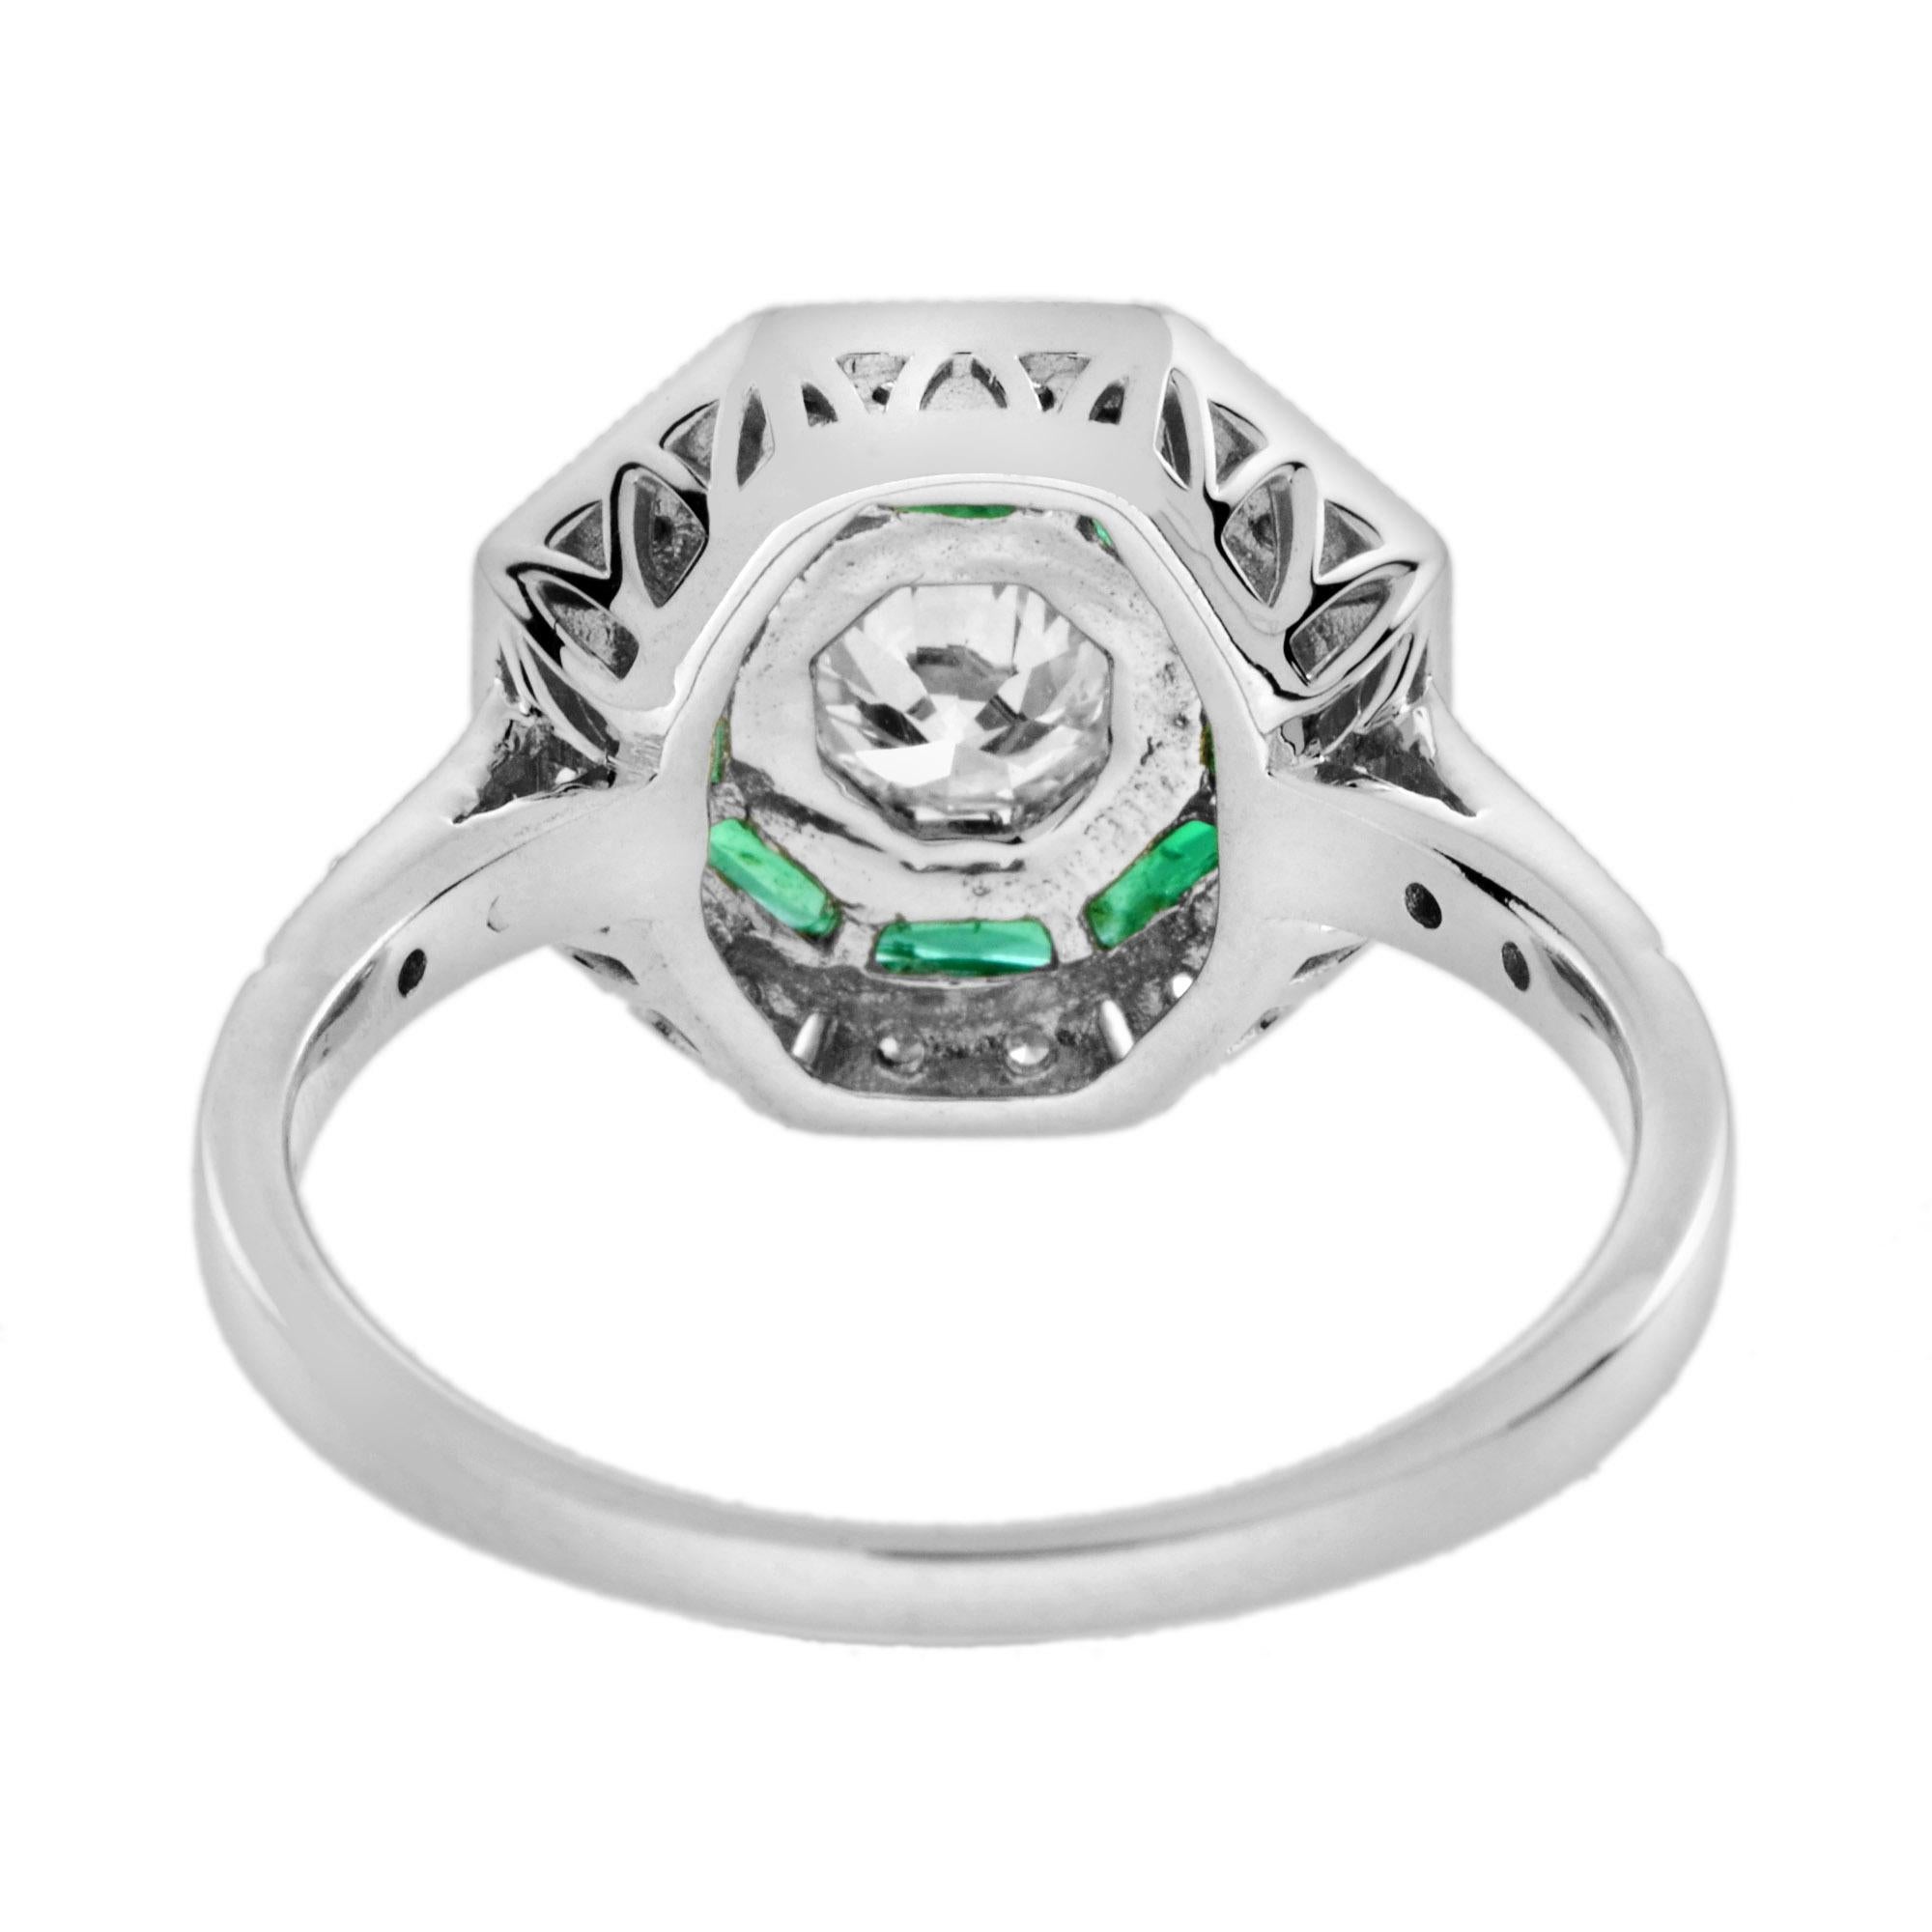 Round Cut Diamond and Emerald Octagonal Shape Ring in 18k White Gold